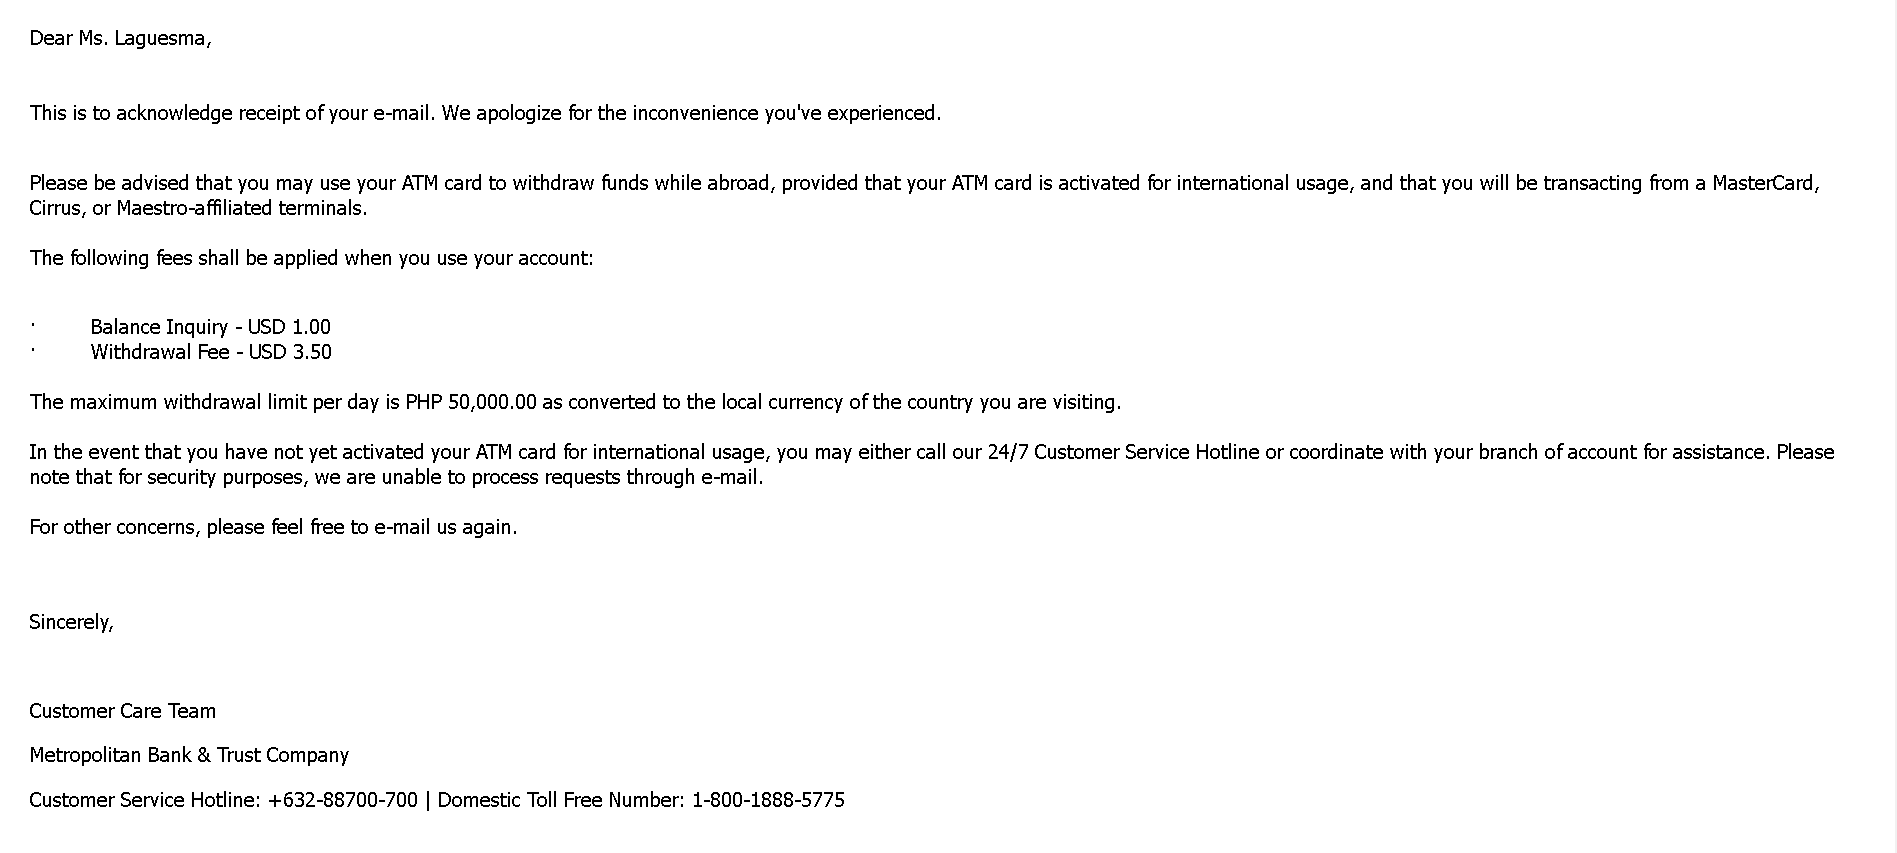 Plain text email example